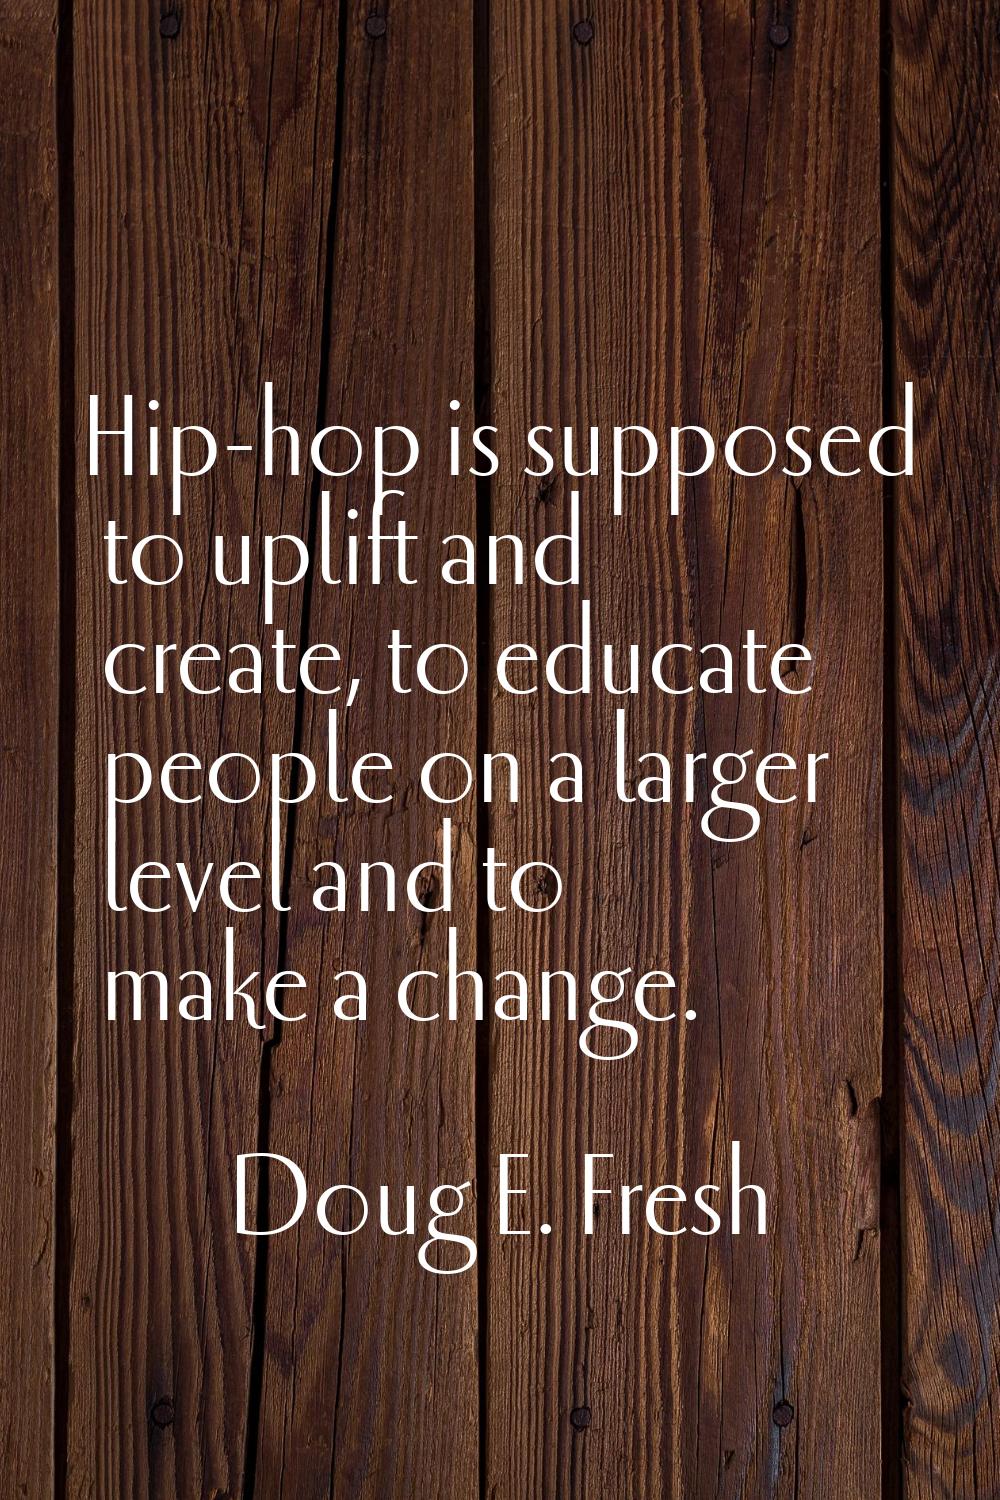 Hip-hop is supposed to uplift and create, to educate people on a larger level and to make a change.